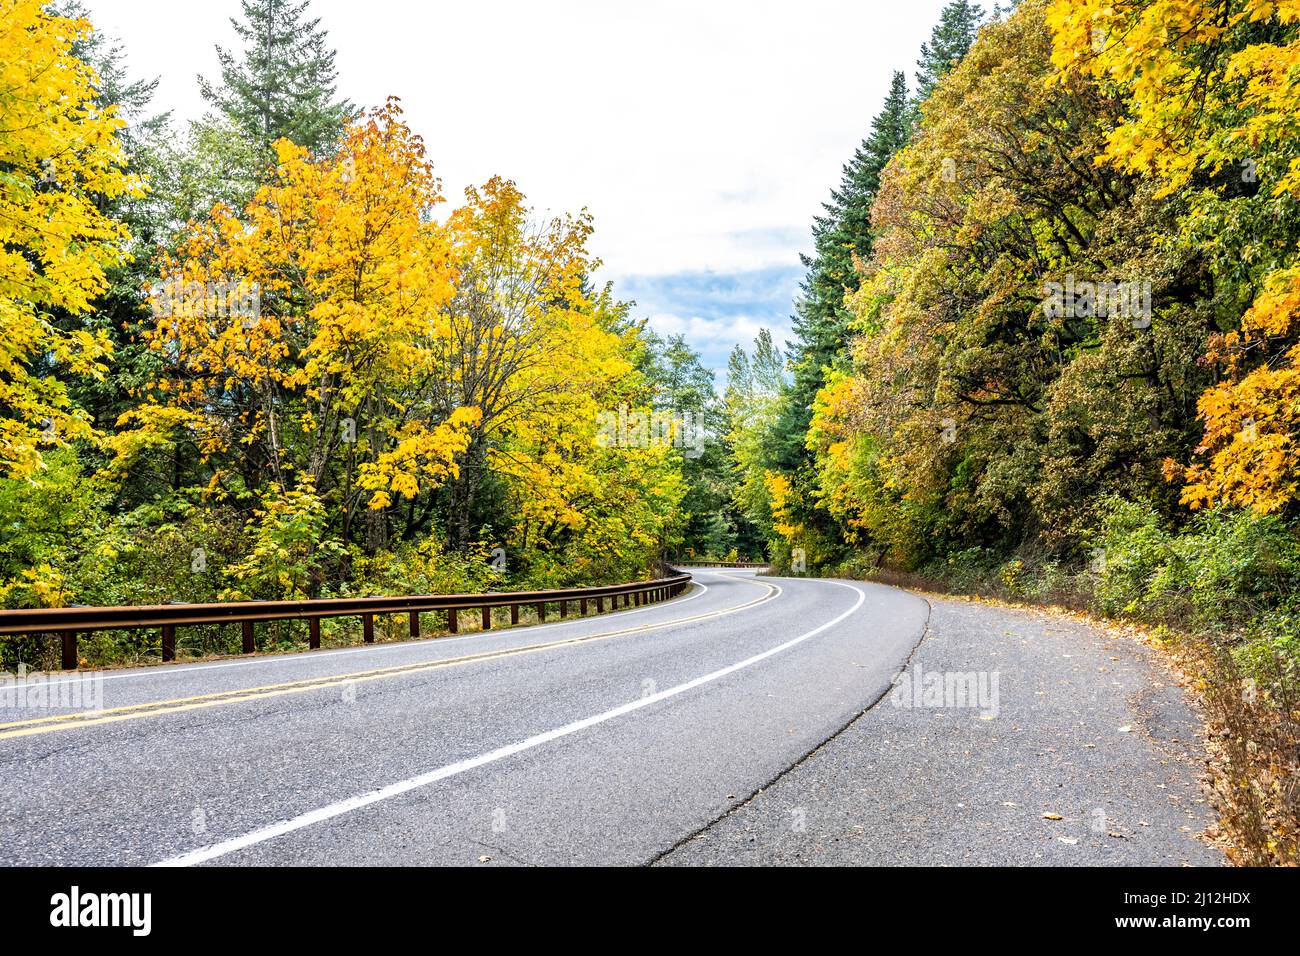 Scenic autumn landscape with a disappearing around the corner winding mountain road with markings and a security fence and yellowed forest trees on th Stock Photo